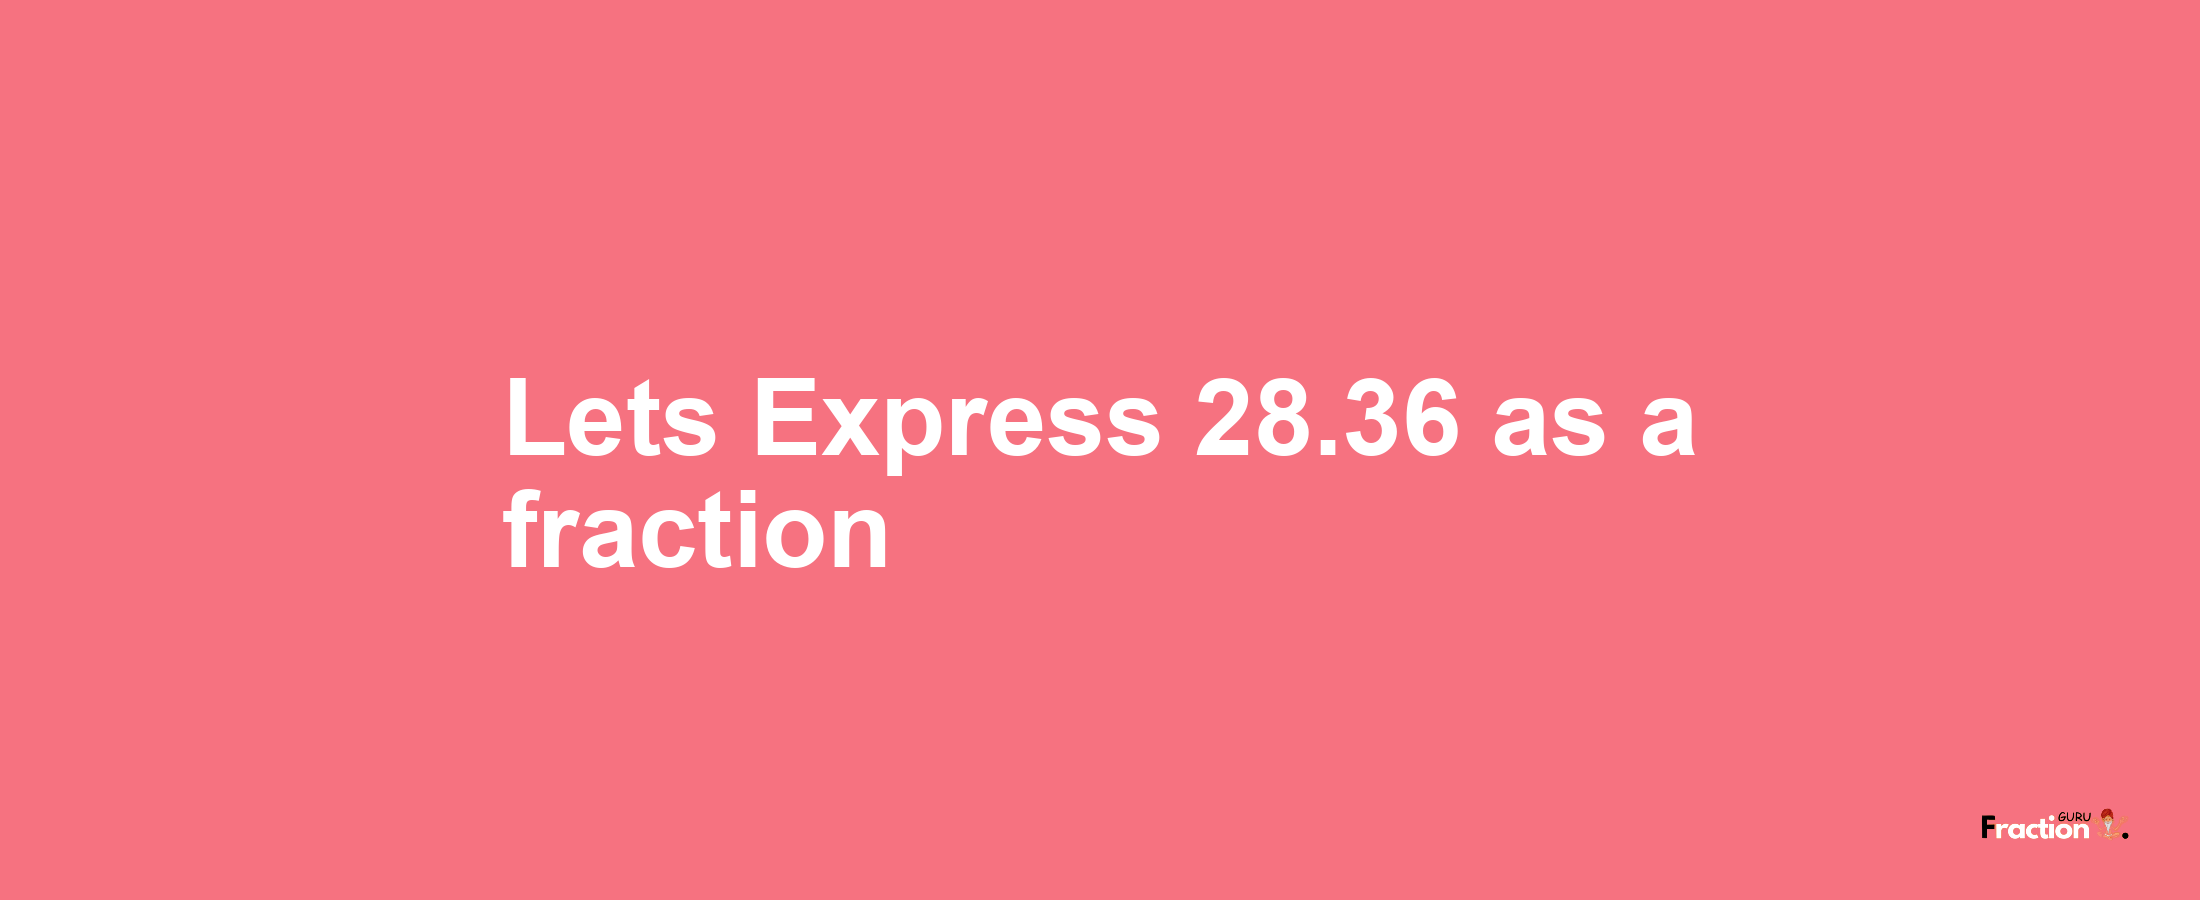 Lets Express 28.36 as afraction